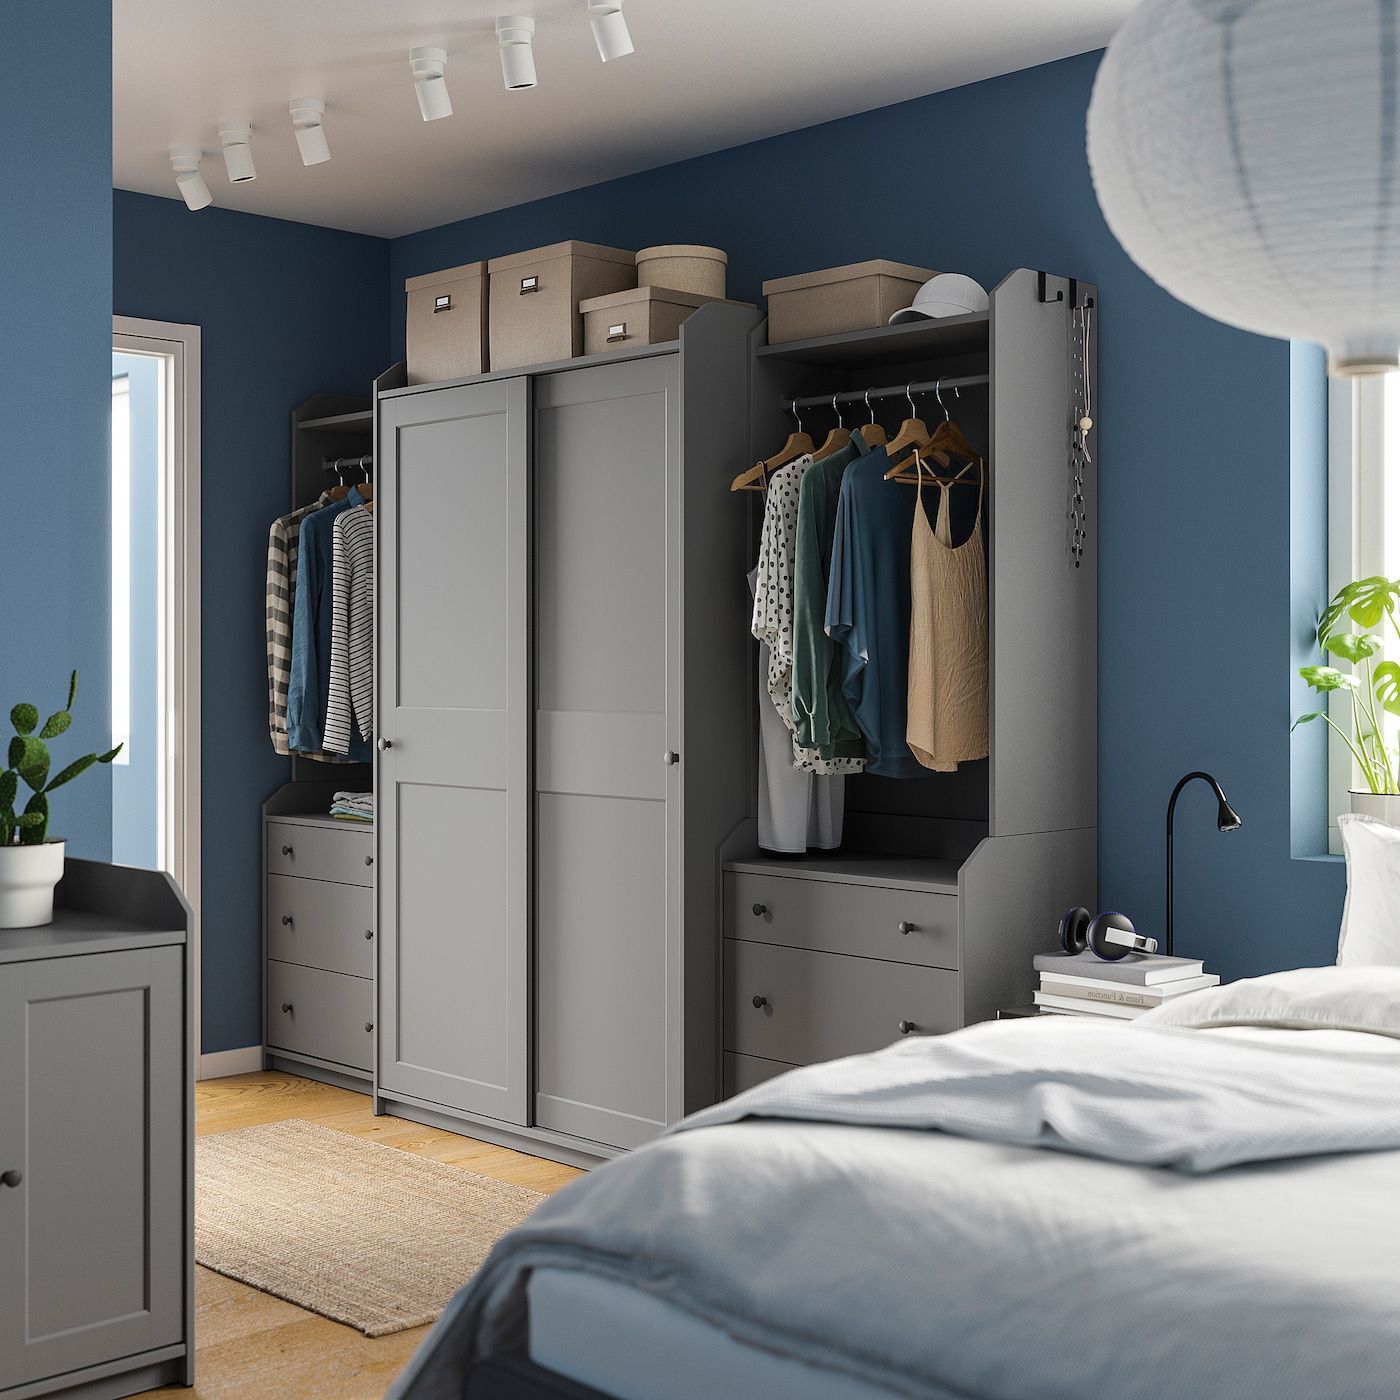 Hauga Wardrobe Combination, Gray, 1015/8x215/8x783/8" – Ikea Within Wardrobes Chest Of Drawers Combination (View 3 of 20)